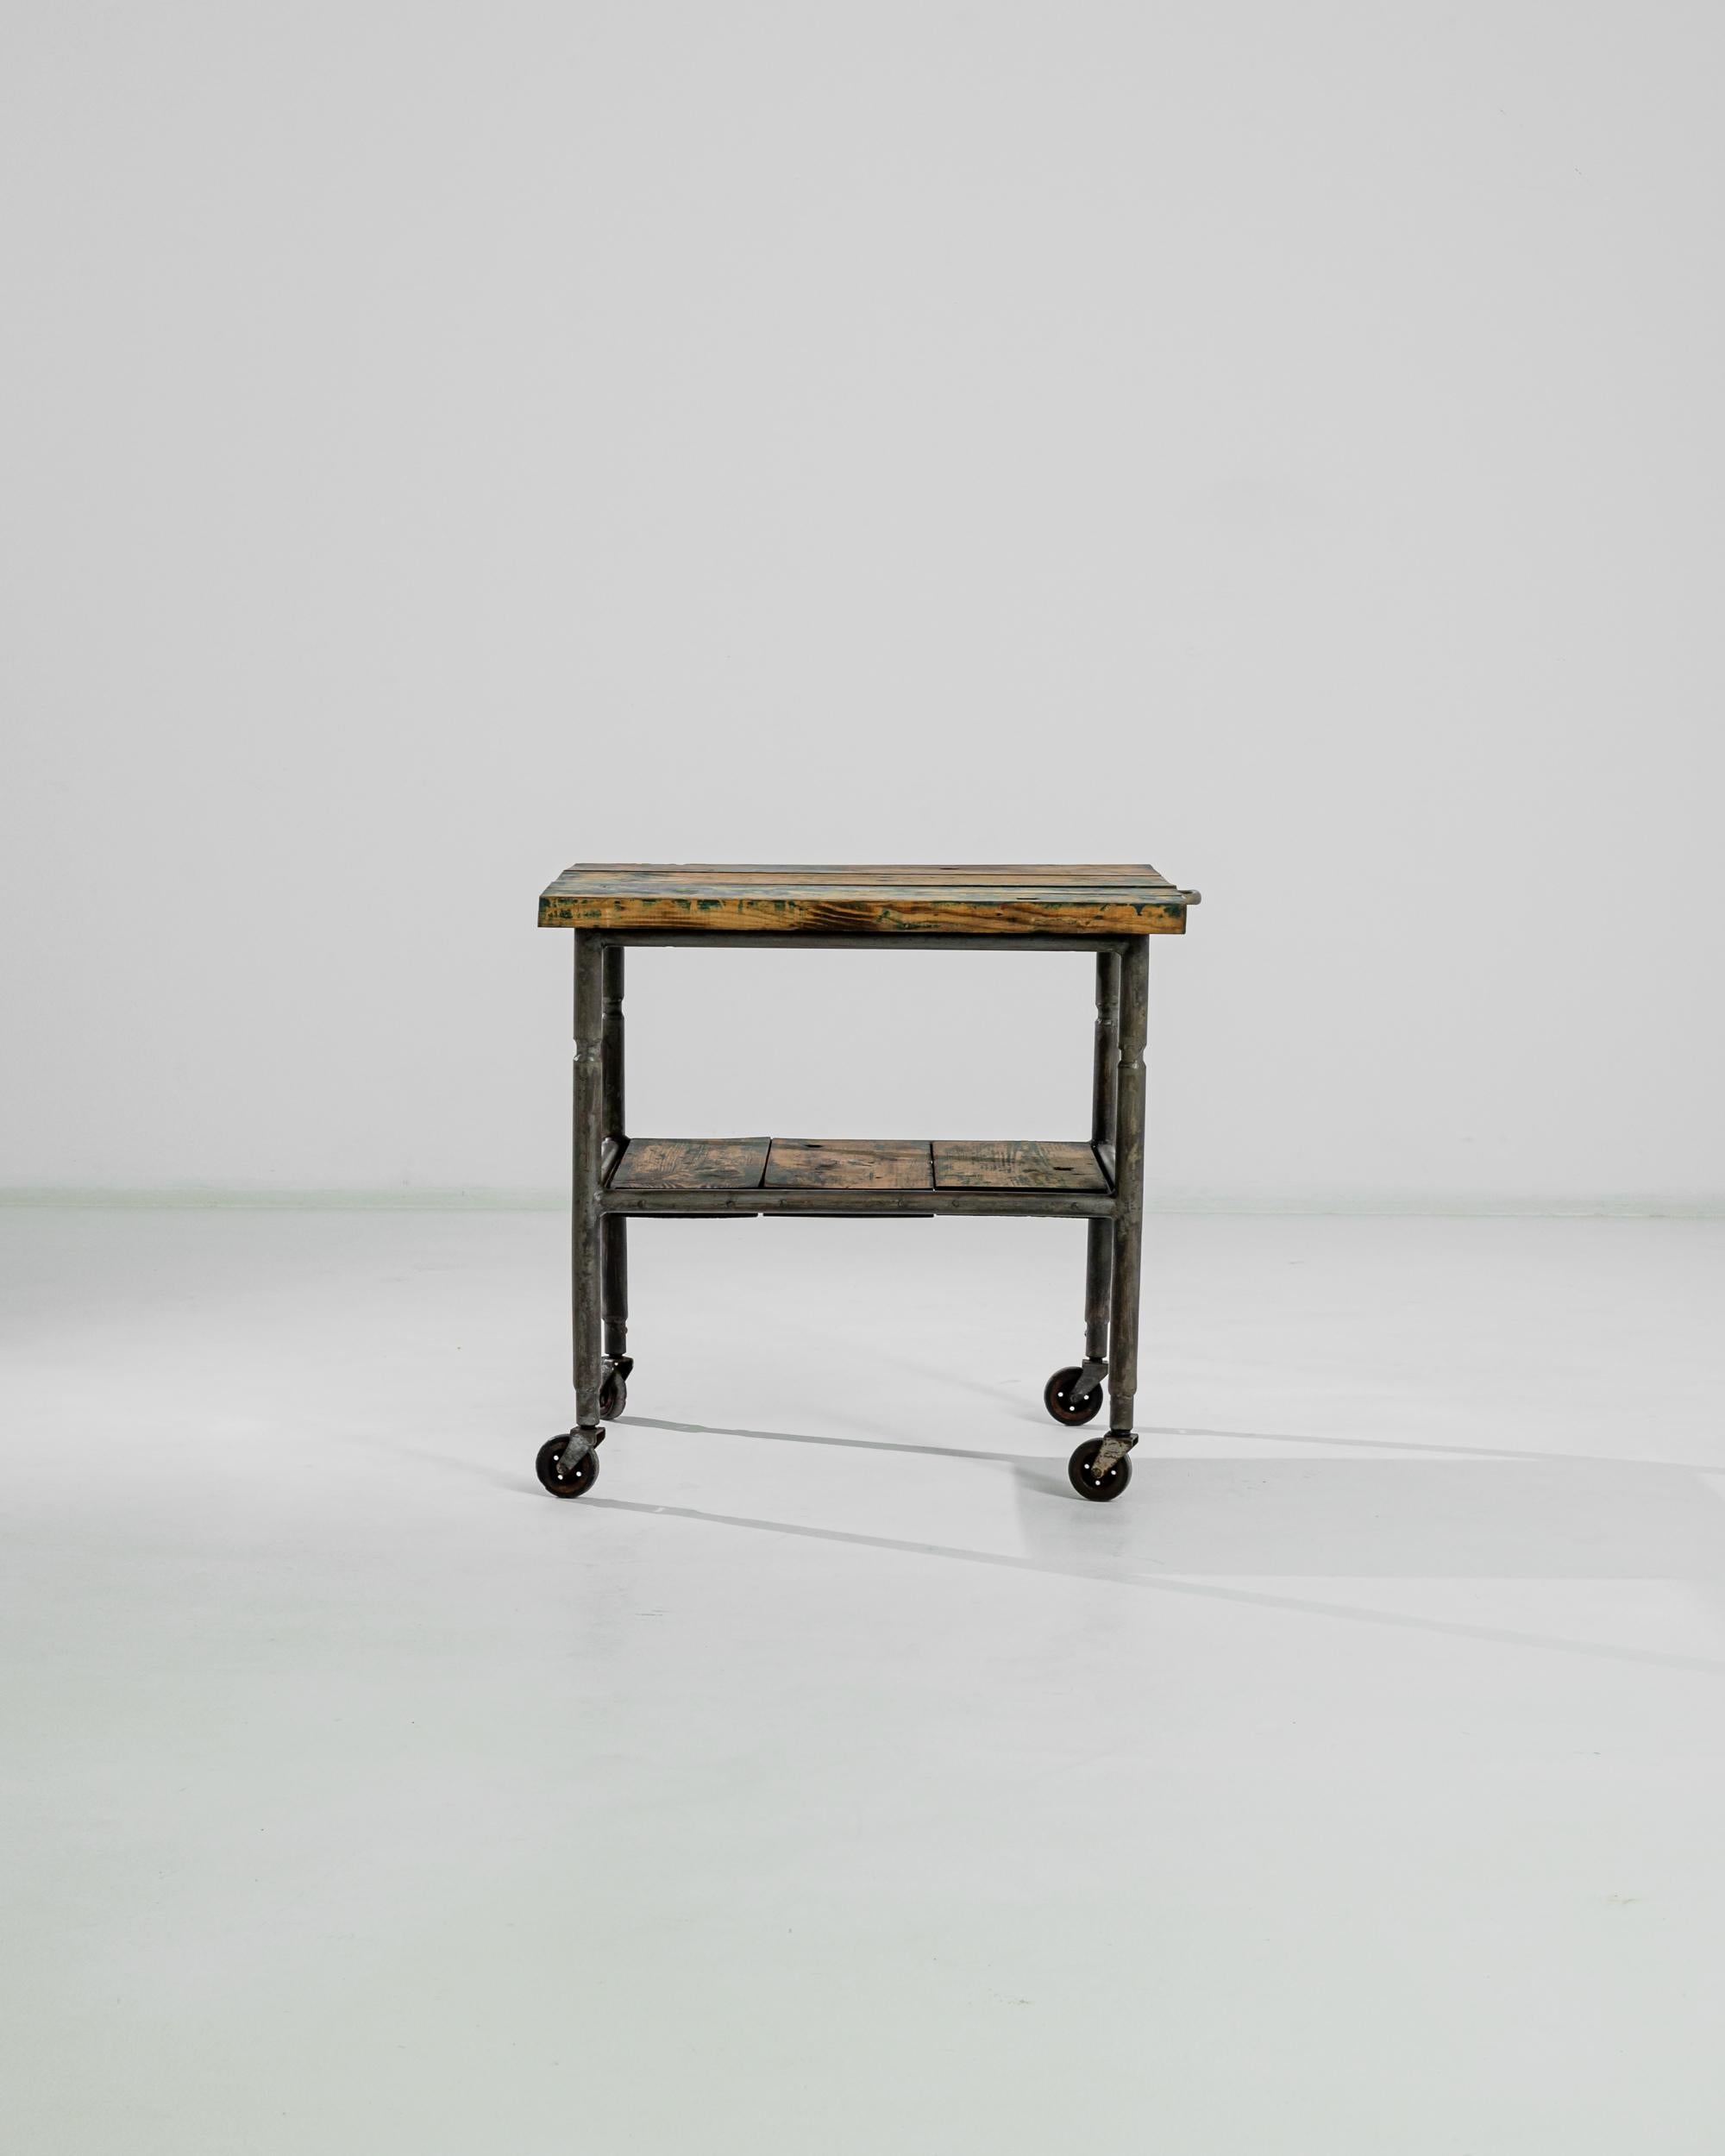 Retired from industrial use, this sturdy cart was sourced in Central Europe. Metal rods, welded and bolted, snap together to construct this perky rolling cart. A time-altered, patinated wood top invites the accompaniment of refined homegoods. Simple